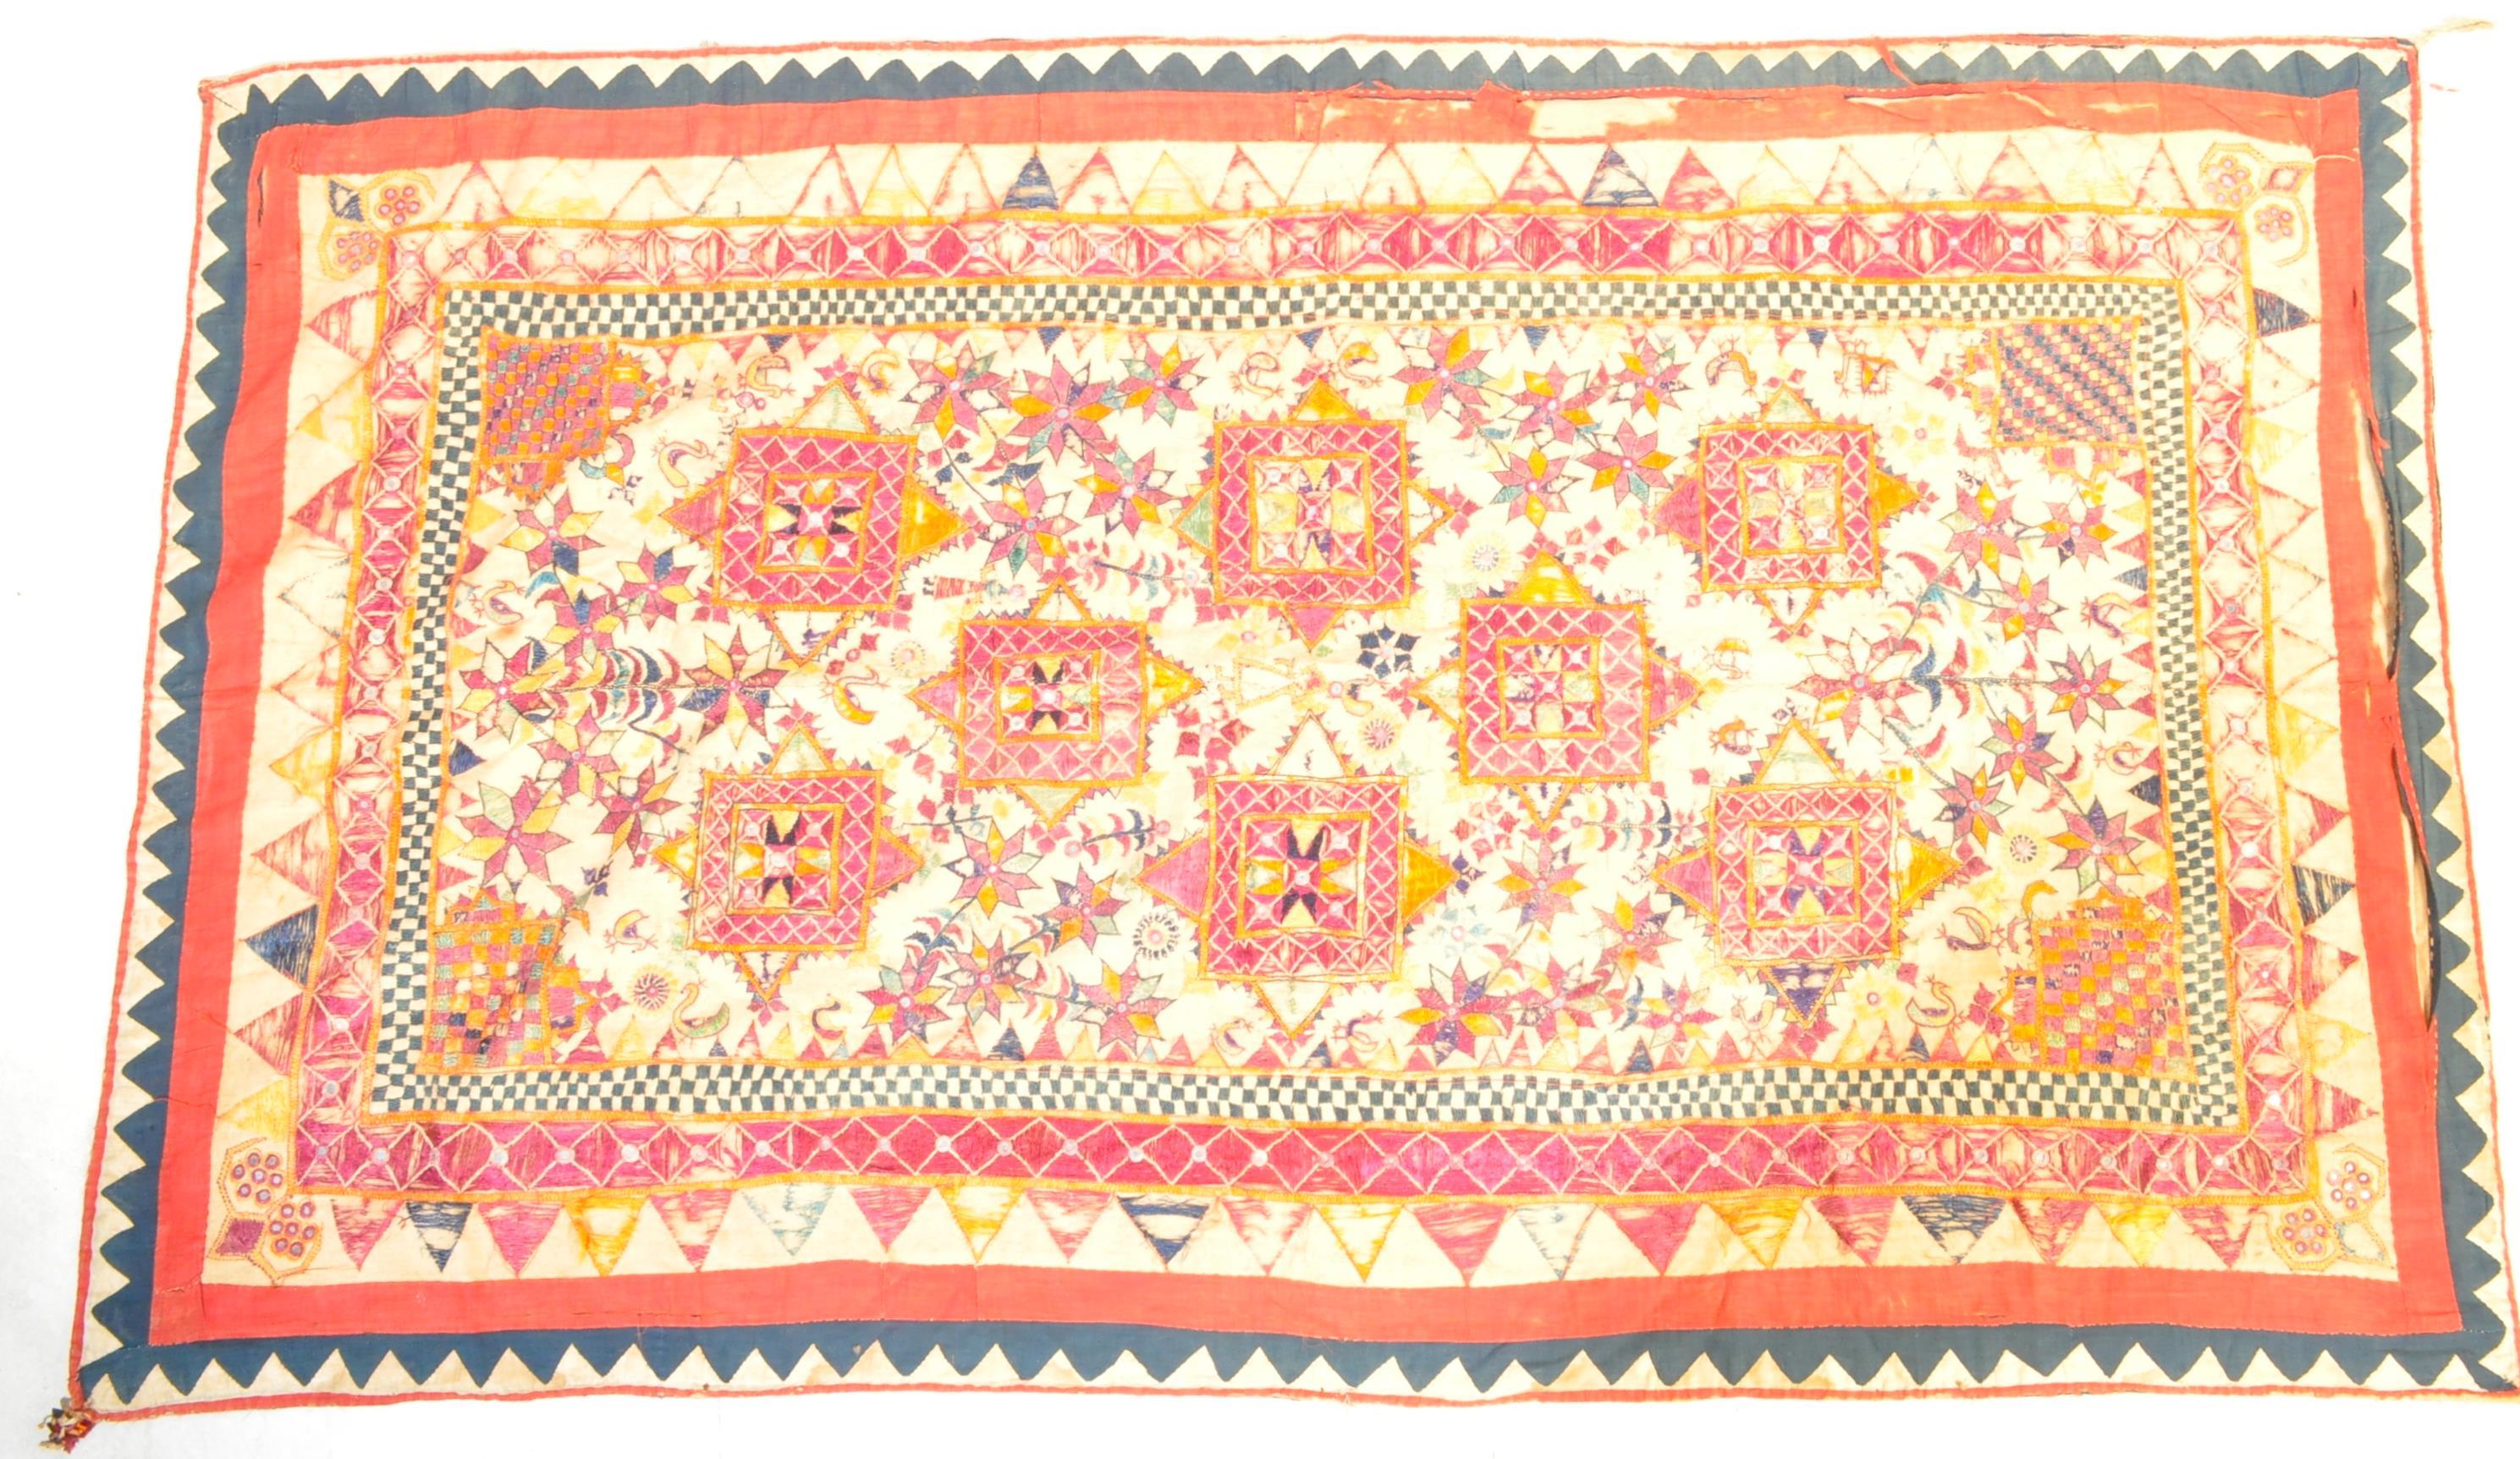 EARLY 20TH CENTURY INDIAN EMBROIDERED SHISHA TEXTILE